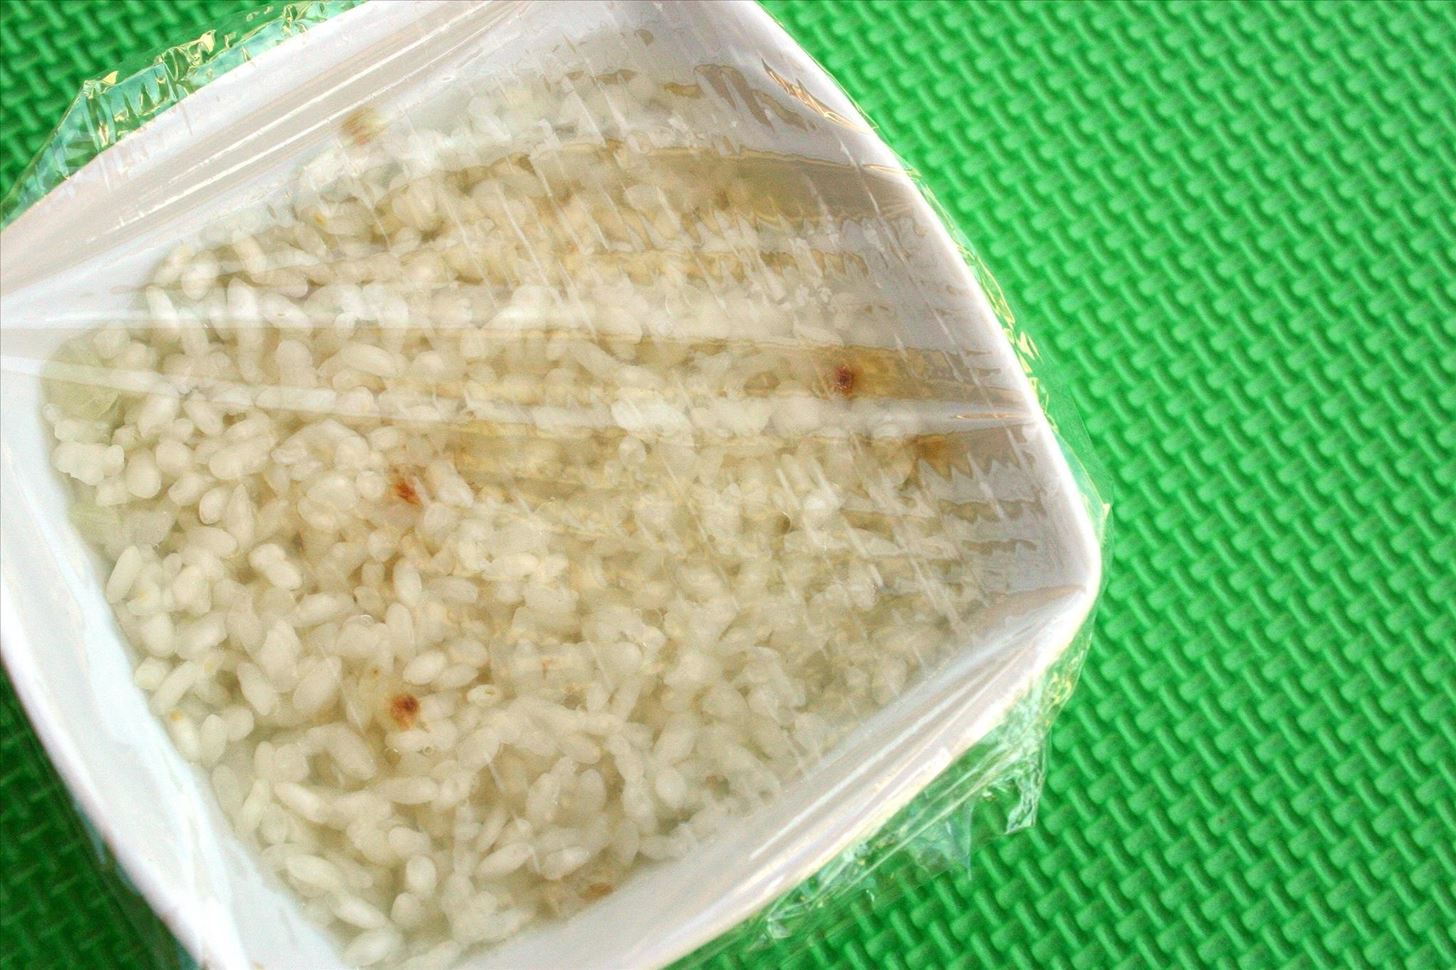 How to Make Fast, Easy Single-Serve Risotto in the Microwave